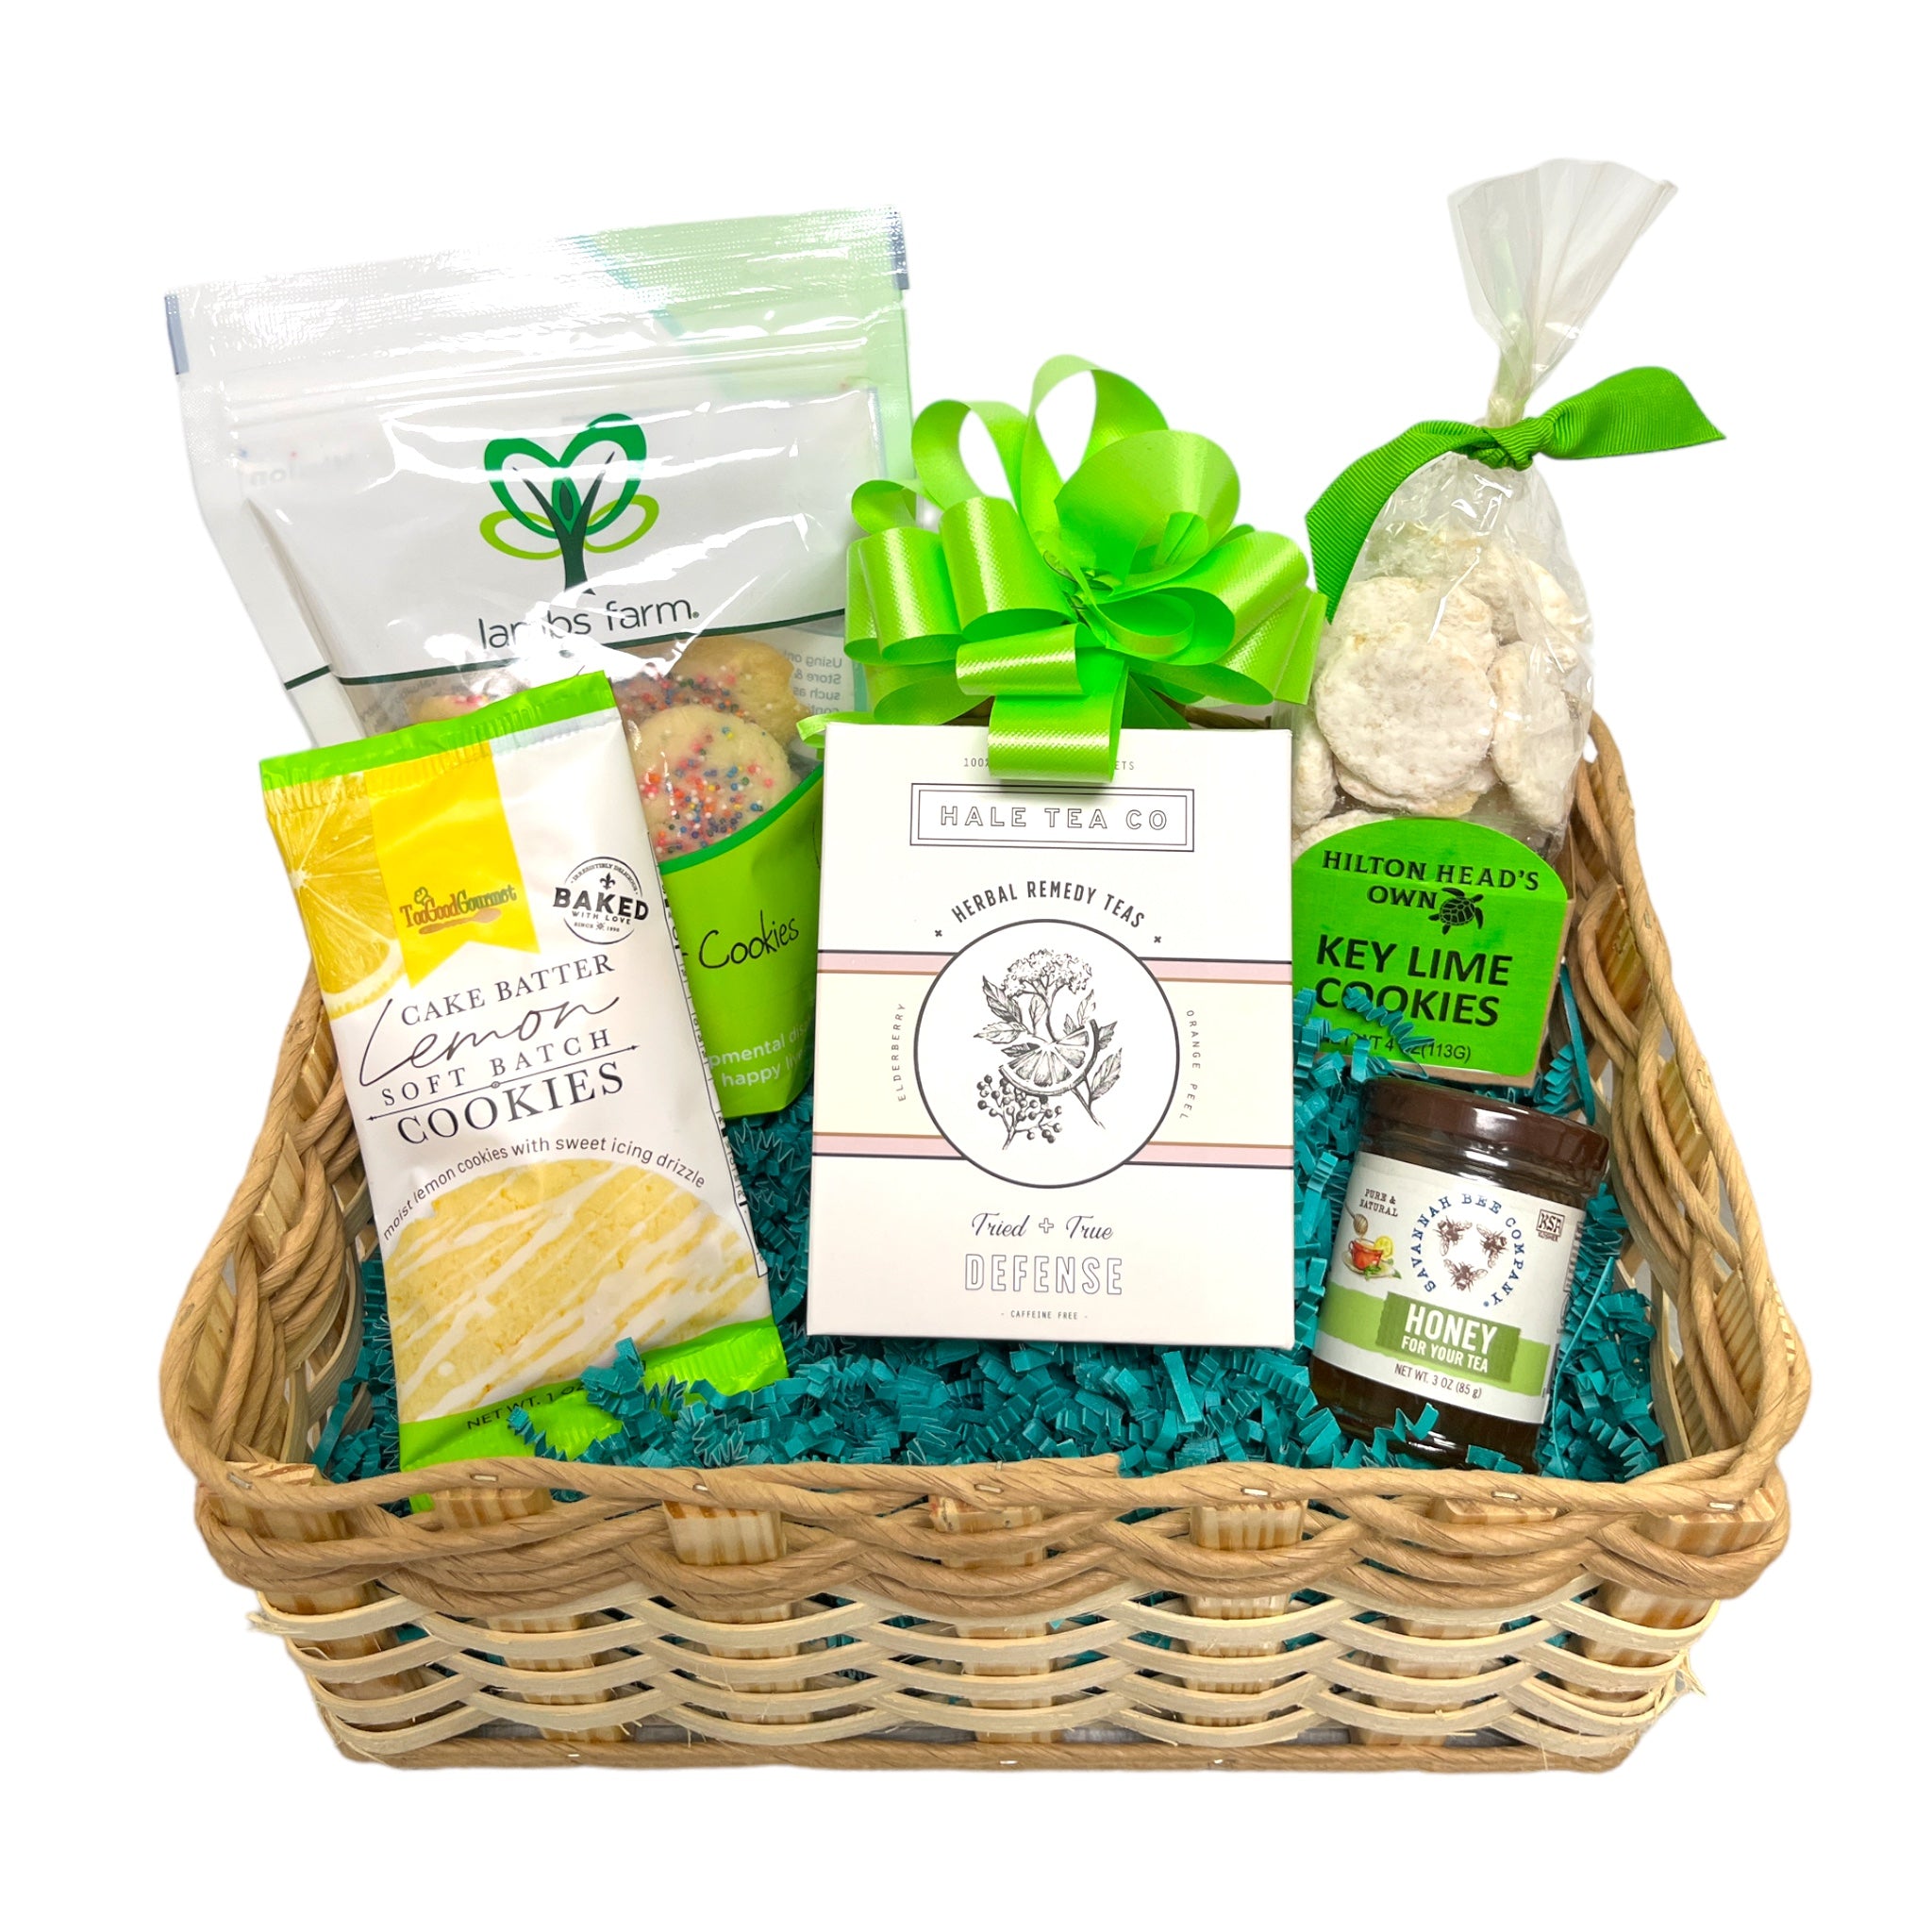 Soup Gift Baskets: Deluxe Soup Gift Basket with Free Shipping at Gift  Baskets Etc